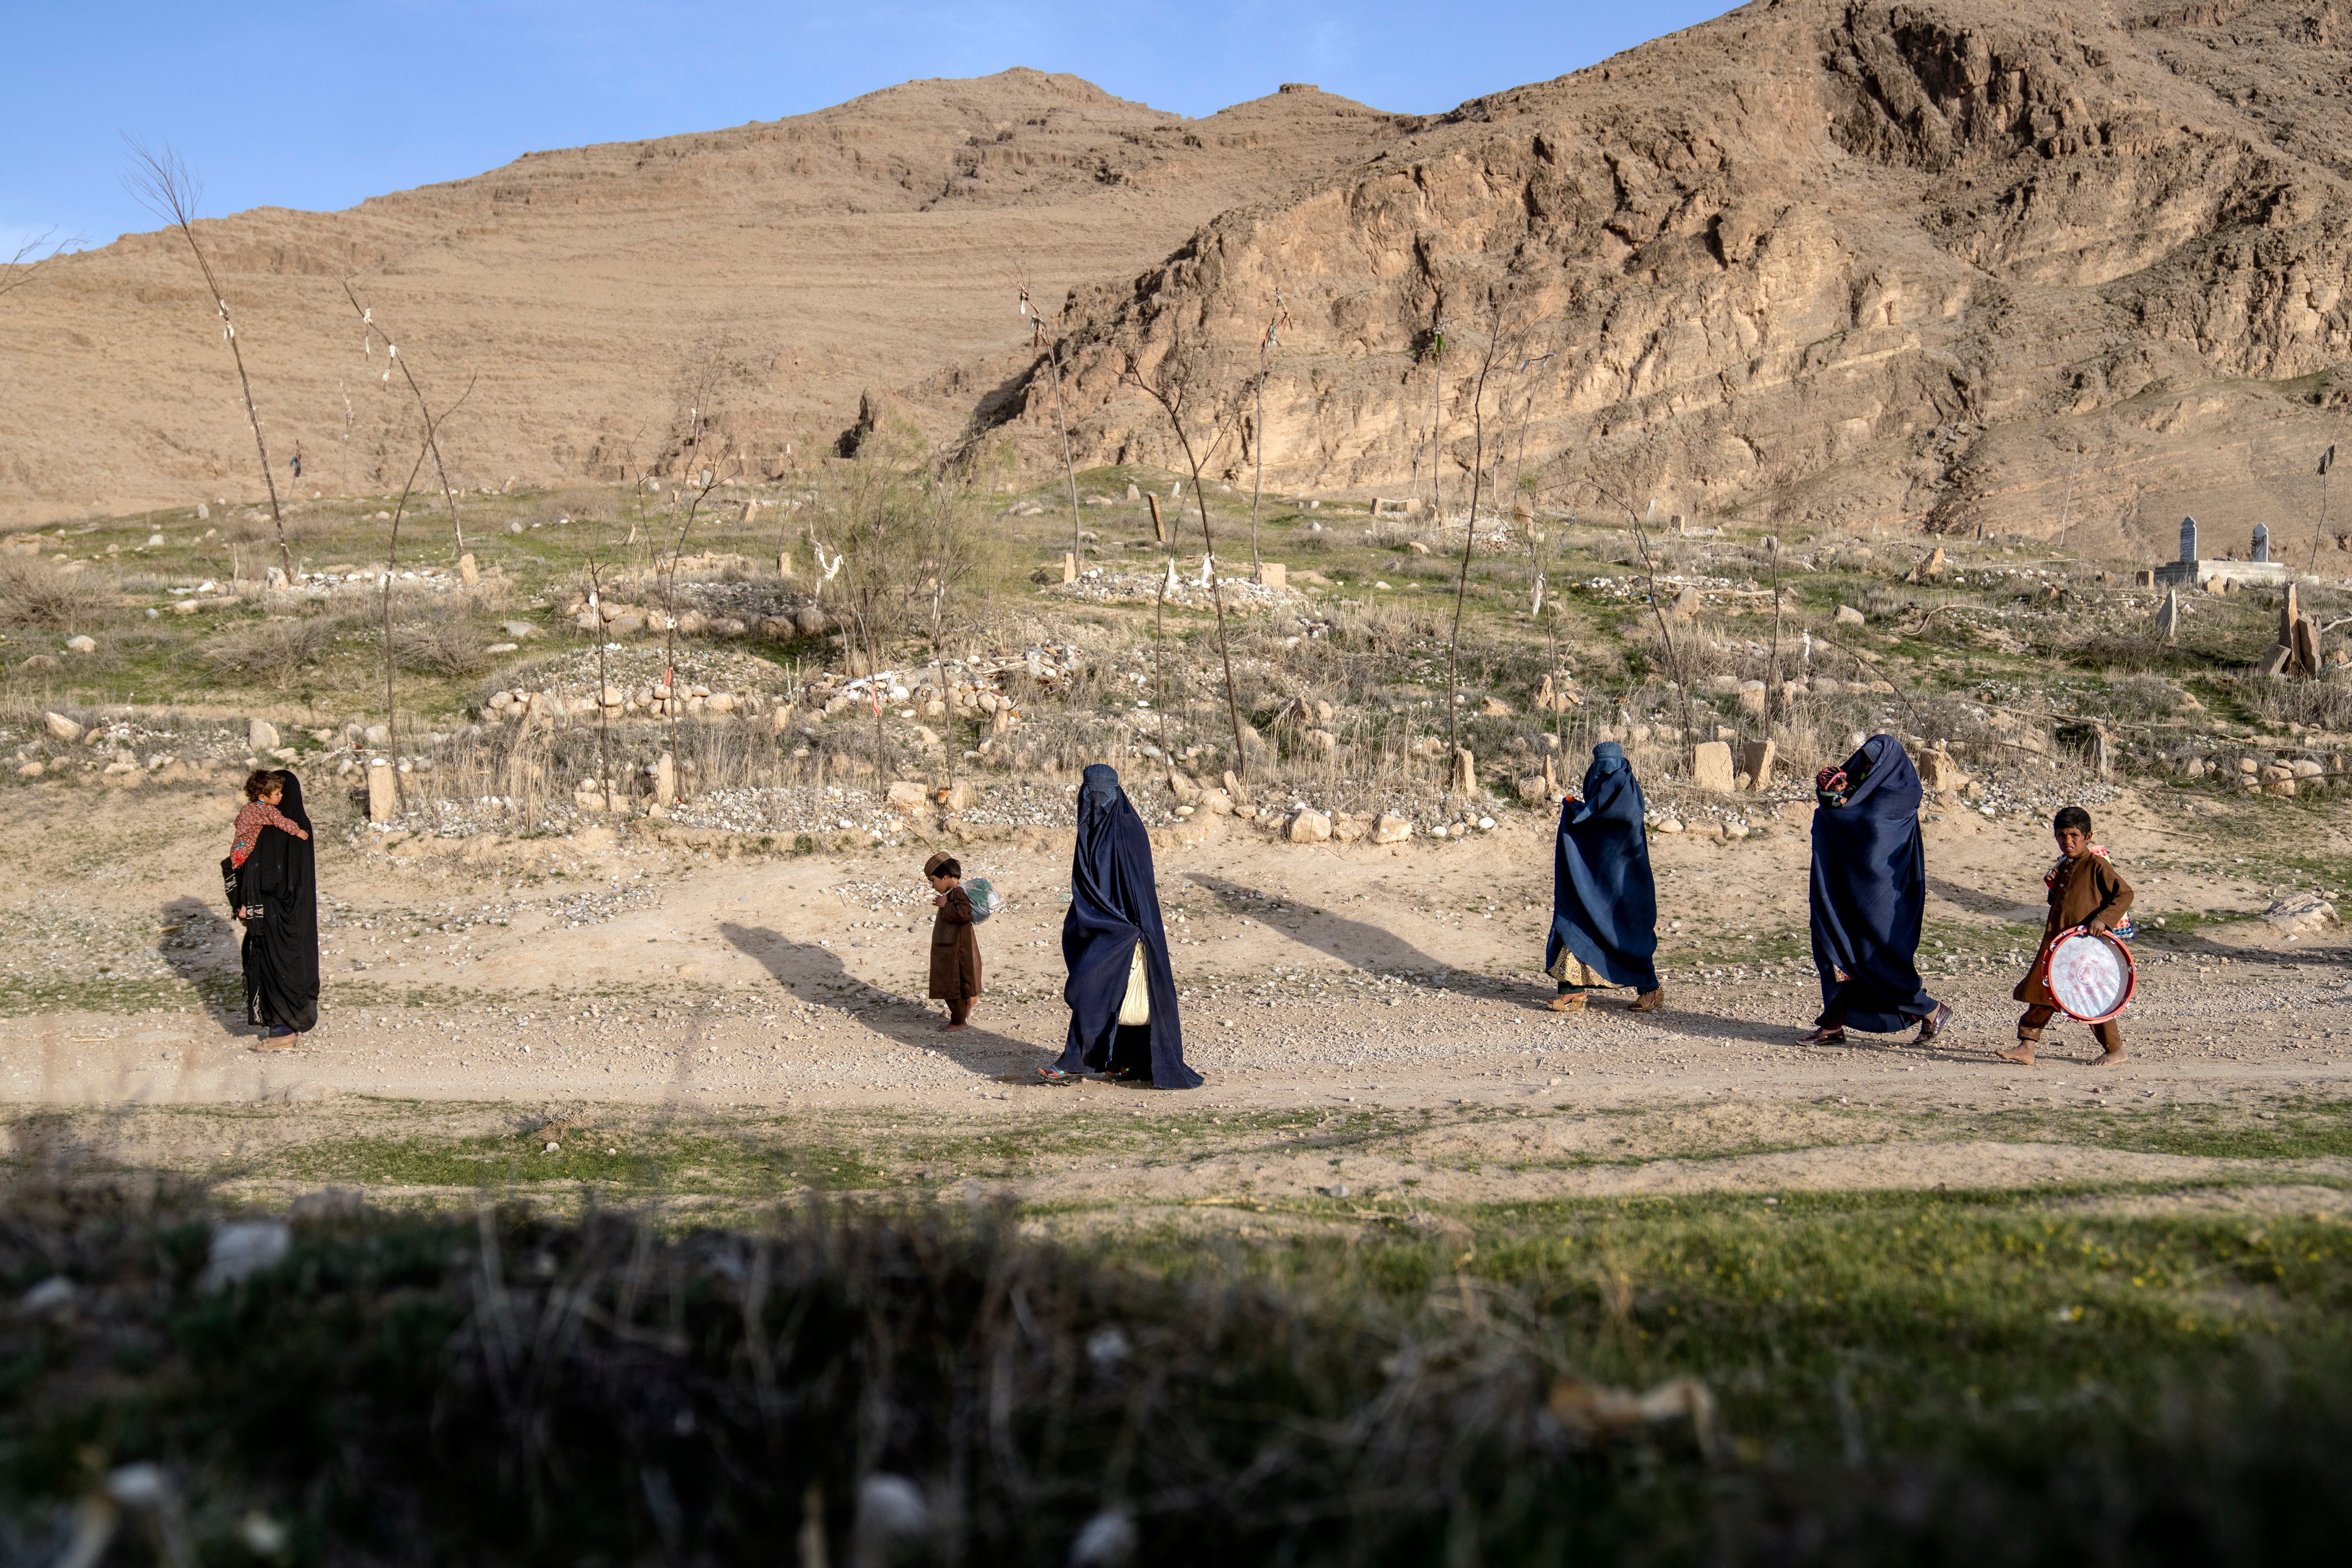 Women walk through a cemetery in a village in a remote region of Afghanistan. The Taliban administration has barred girls from high schools, universities and most jobs, including working for the UN and NGOs. Photo: AP